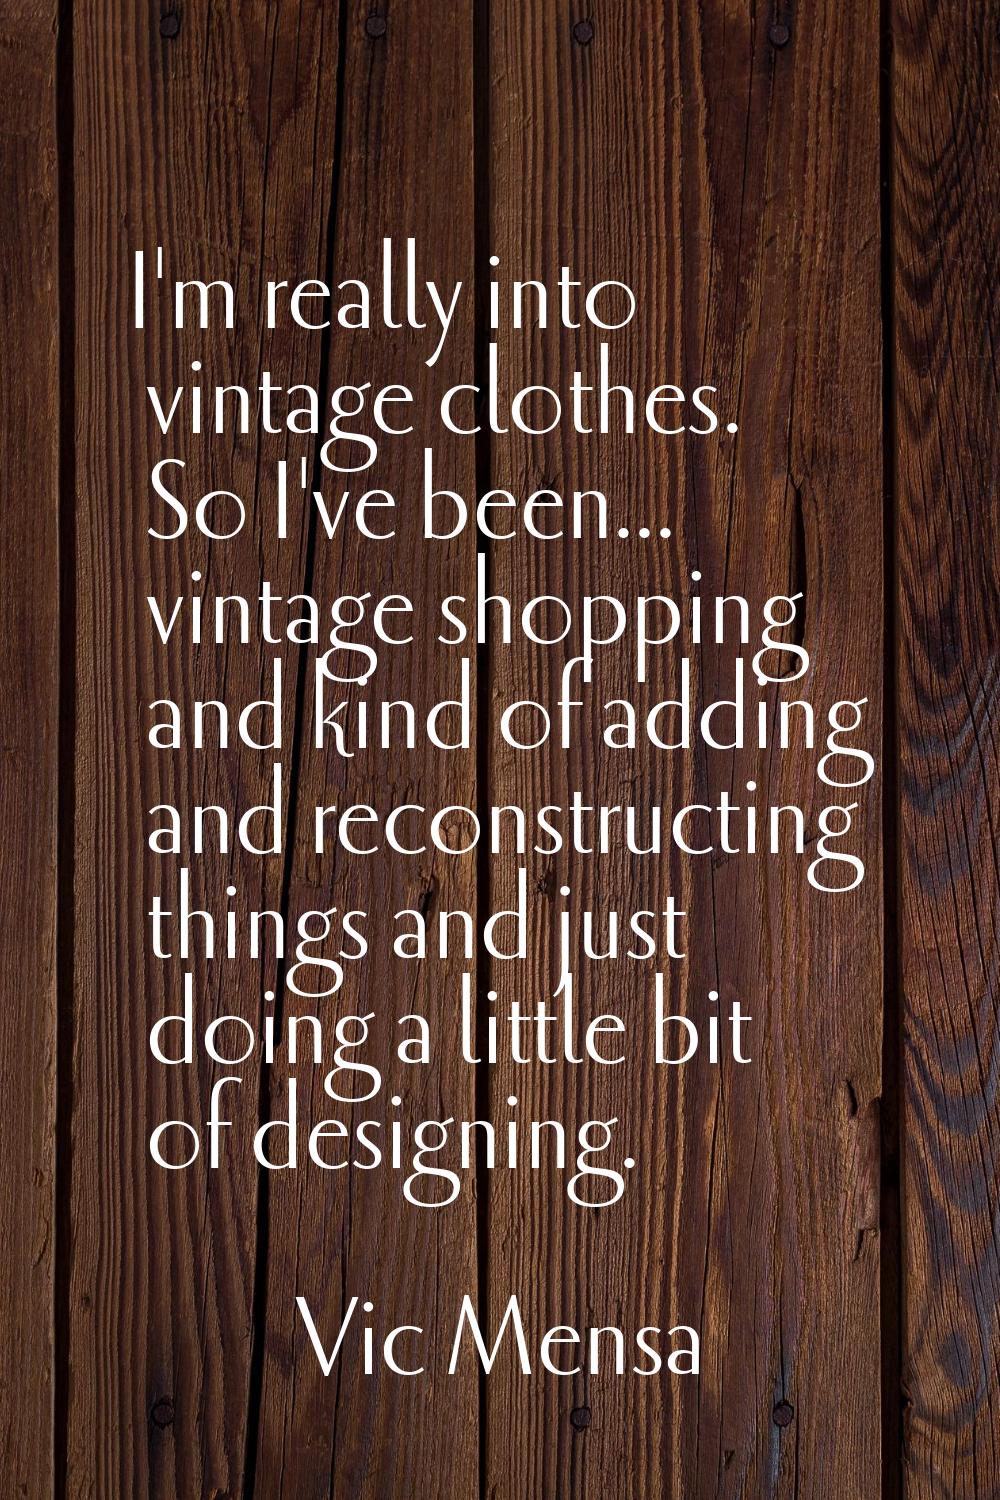 I'm really into vintage clothes. So I've been... vintage shopping and kind of adding and reconstruc